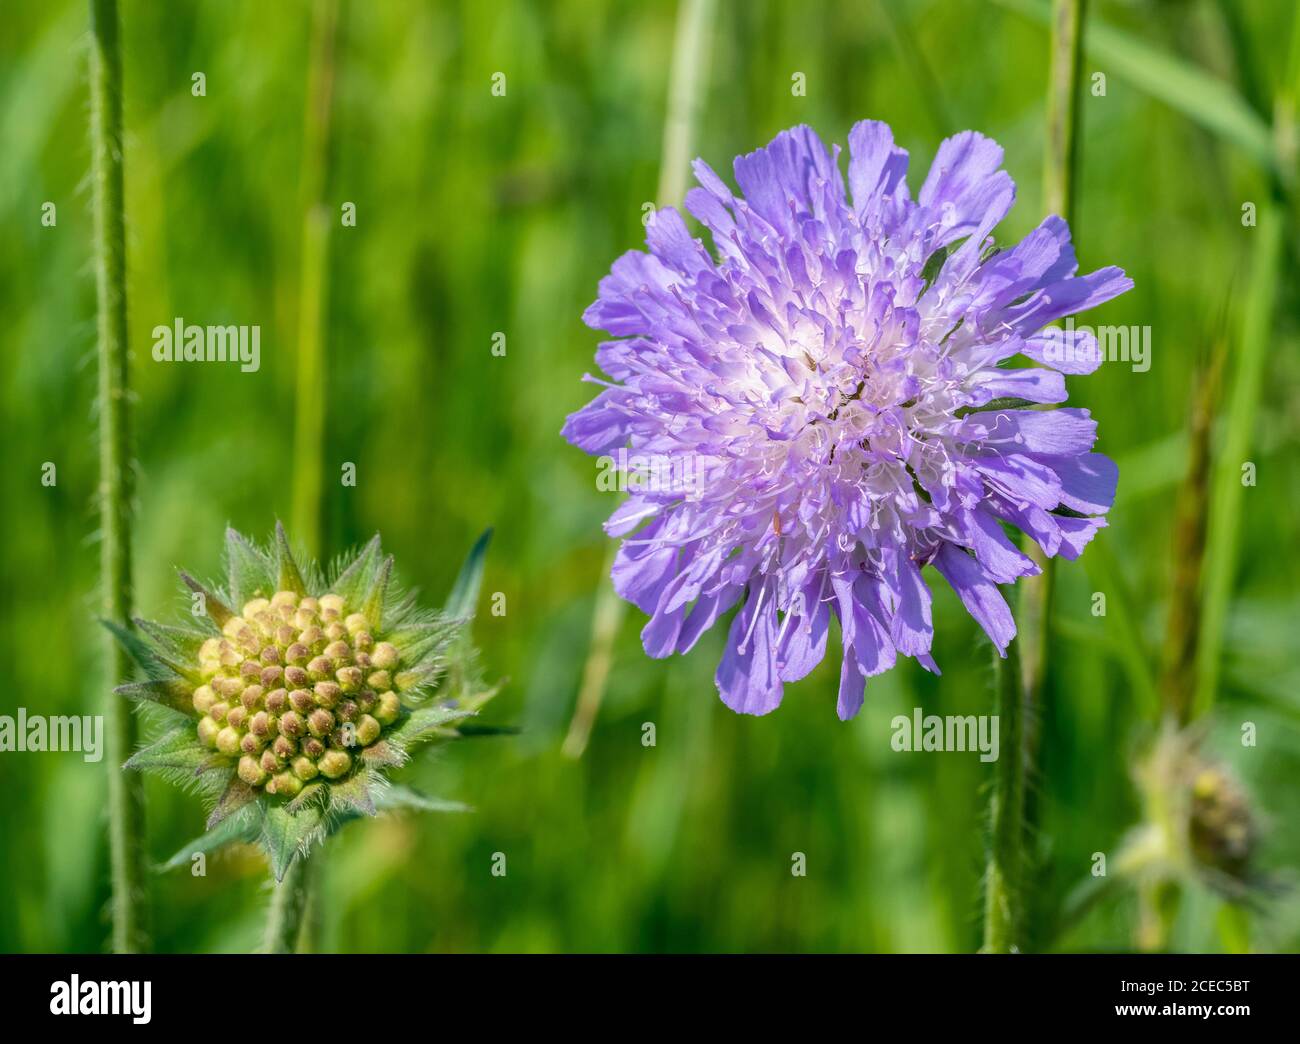 field scabious flower heads in natural sunny ambiance Stock Photo